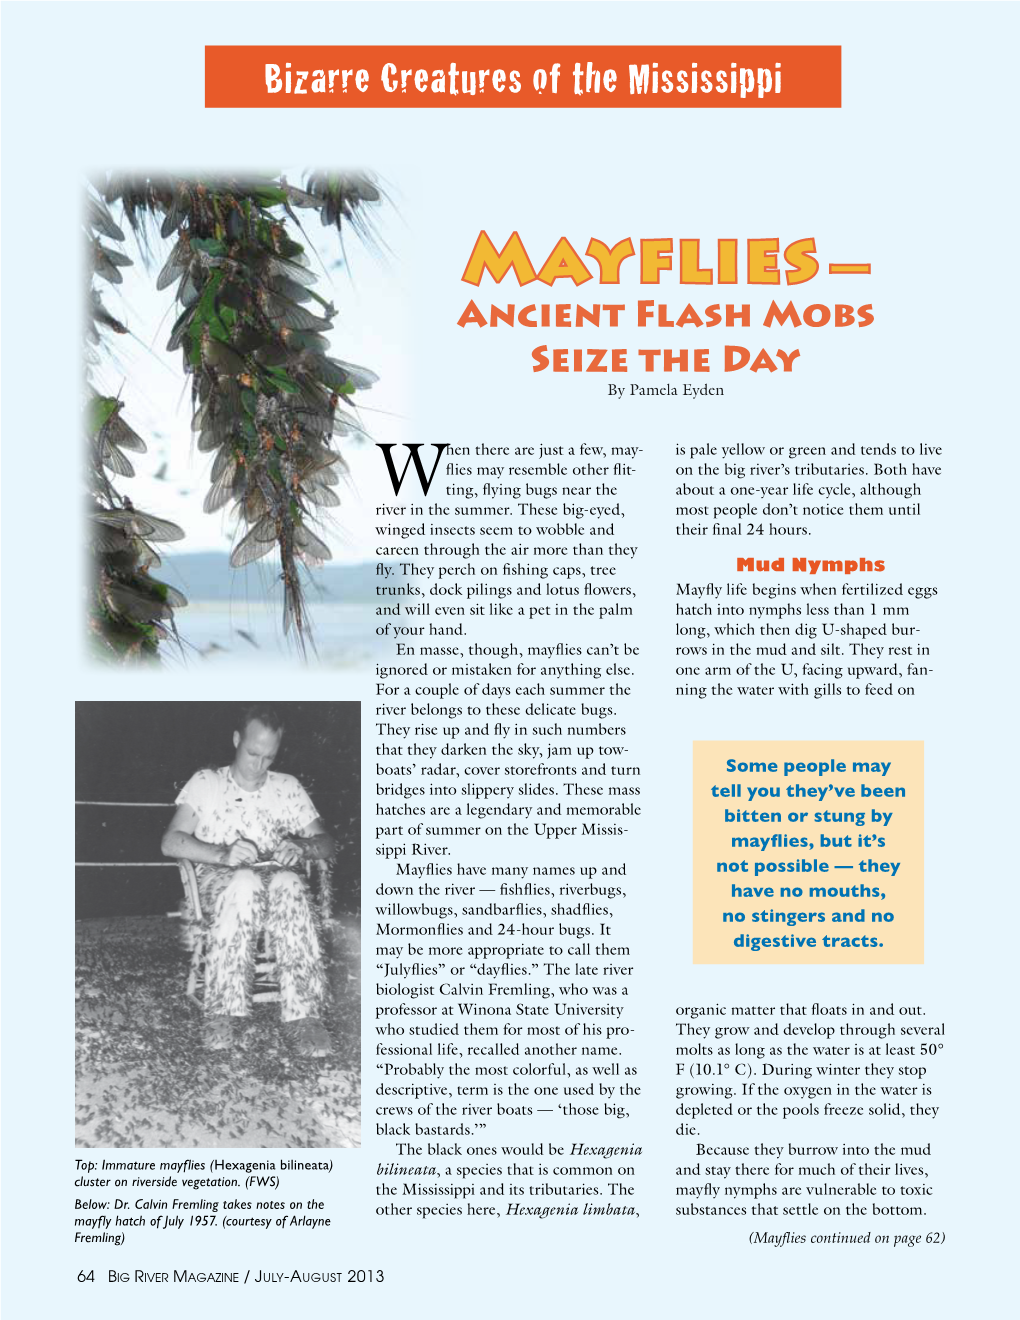 Mayflies — Ancient Flash Mobs Seize the Day by Pamela Eyden